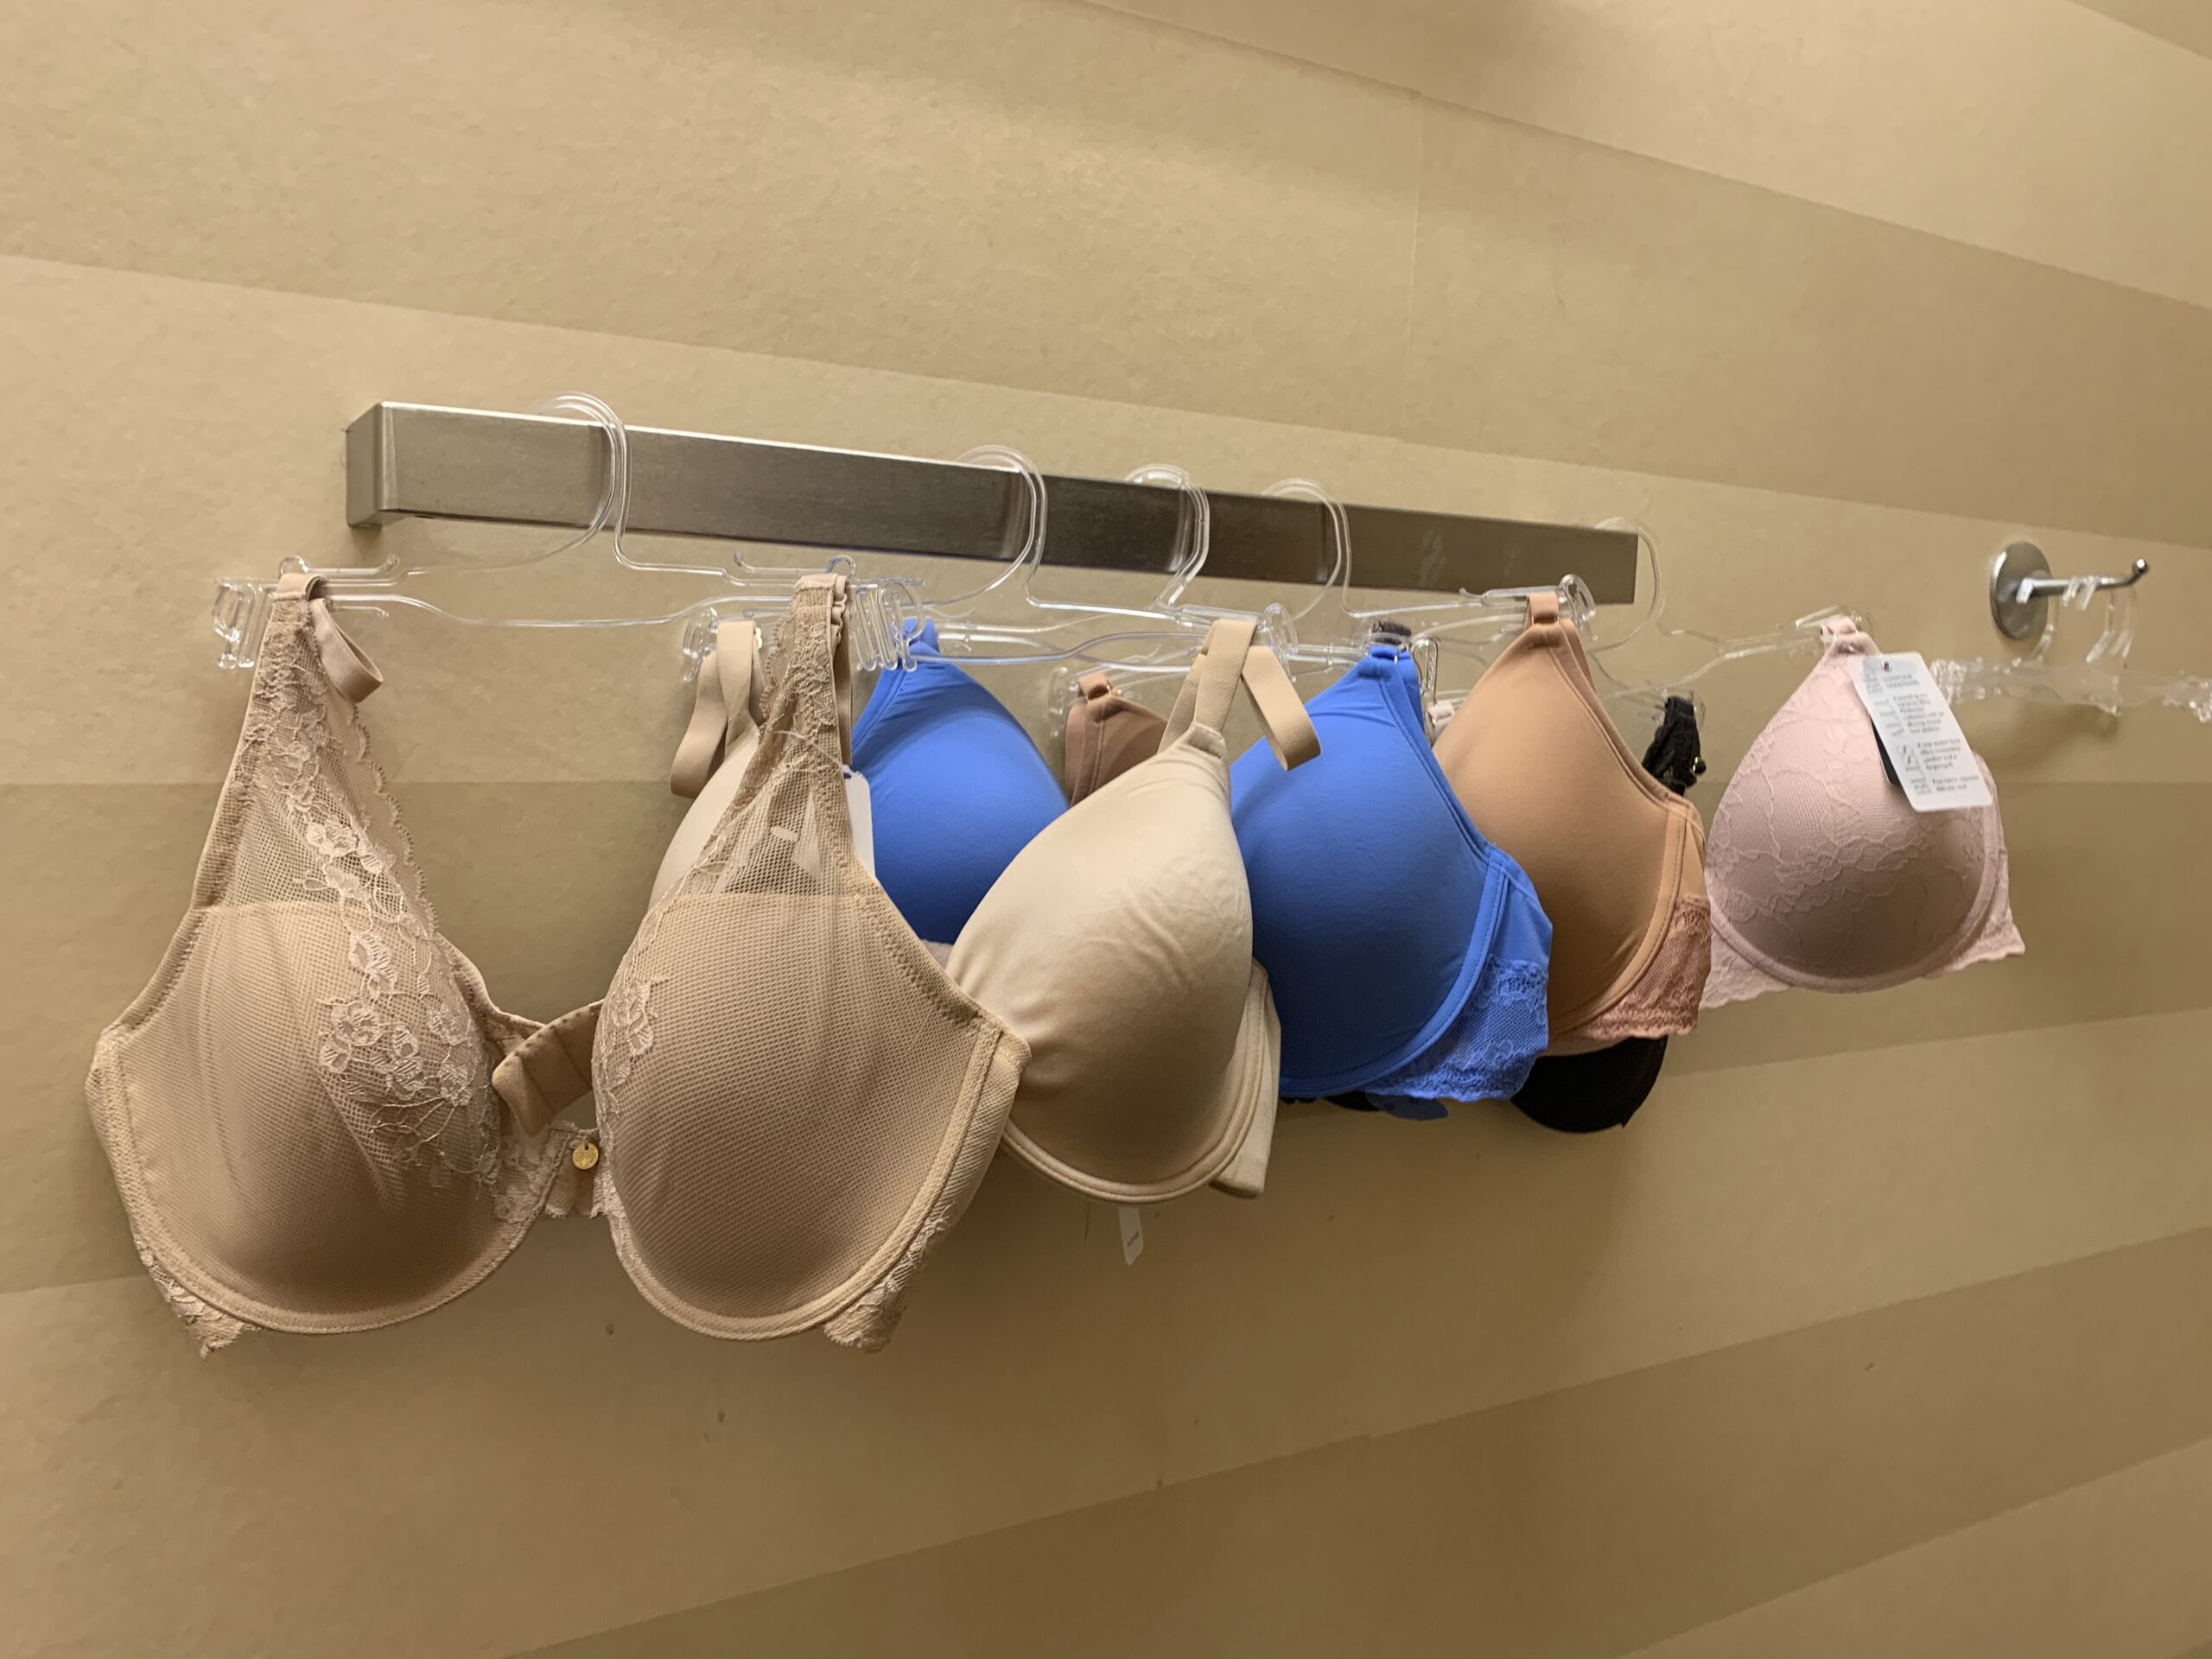 Every girl deserves a professional bra fitting at Nordstrom